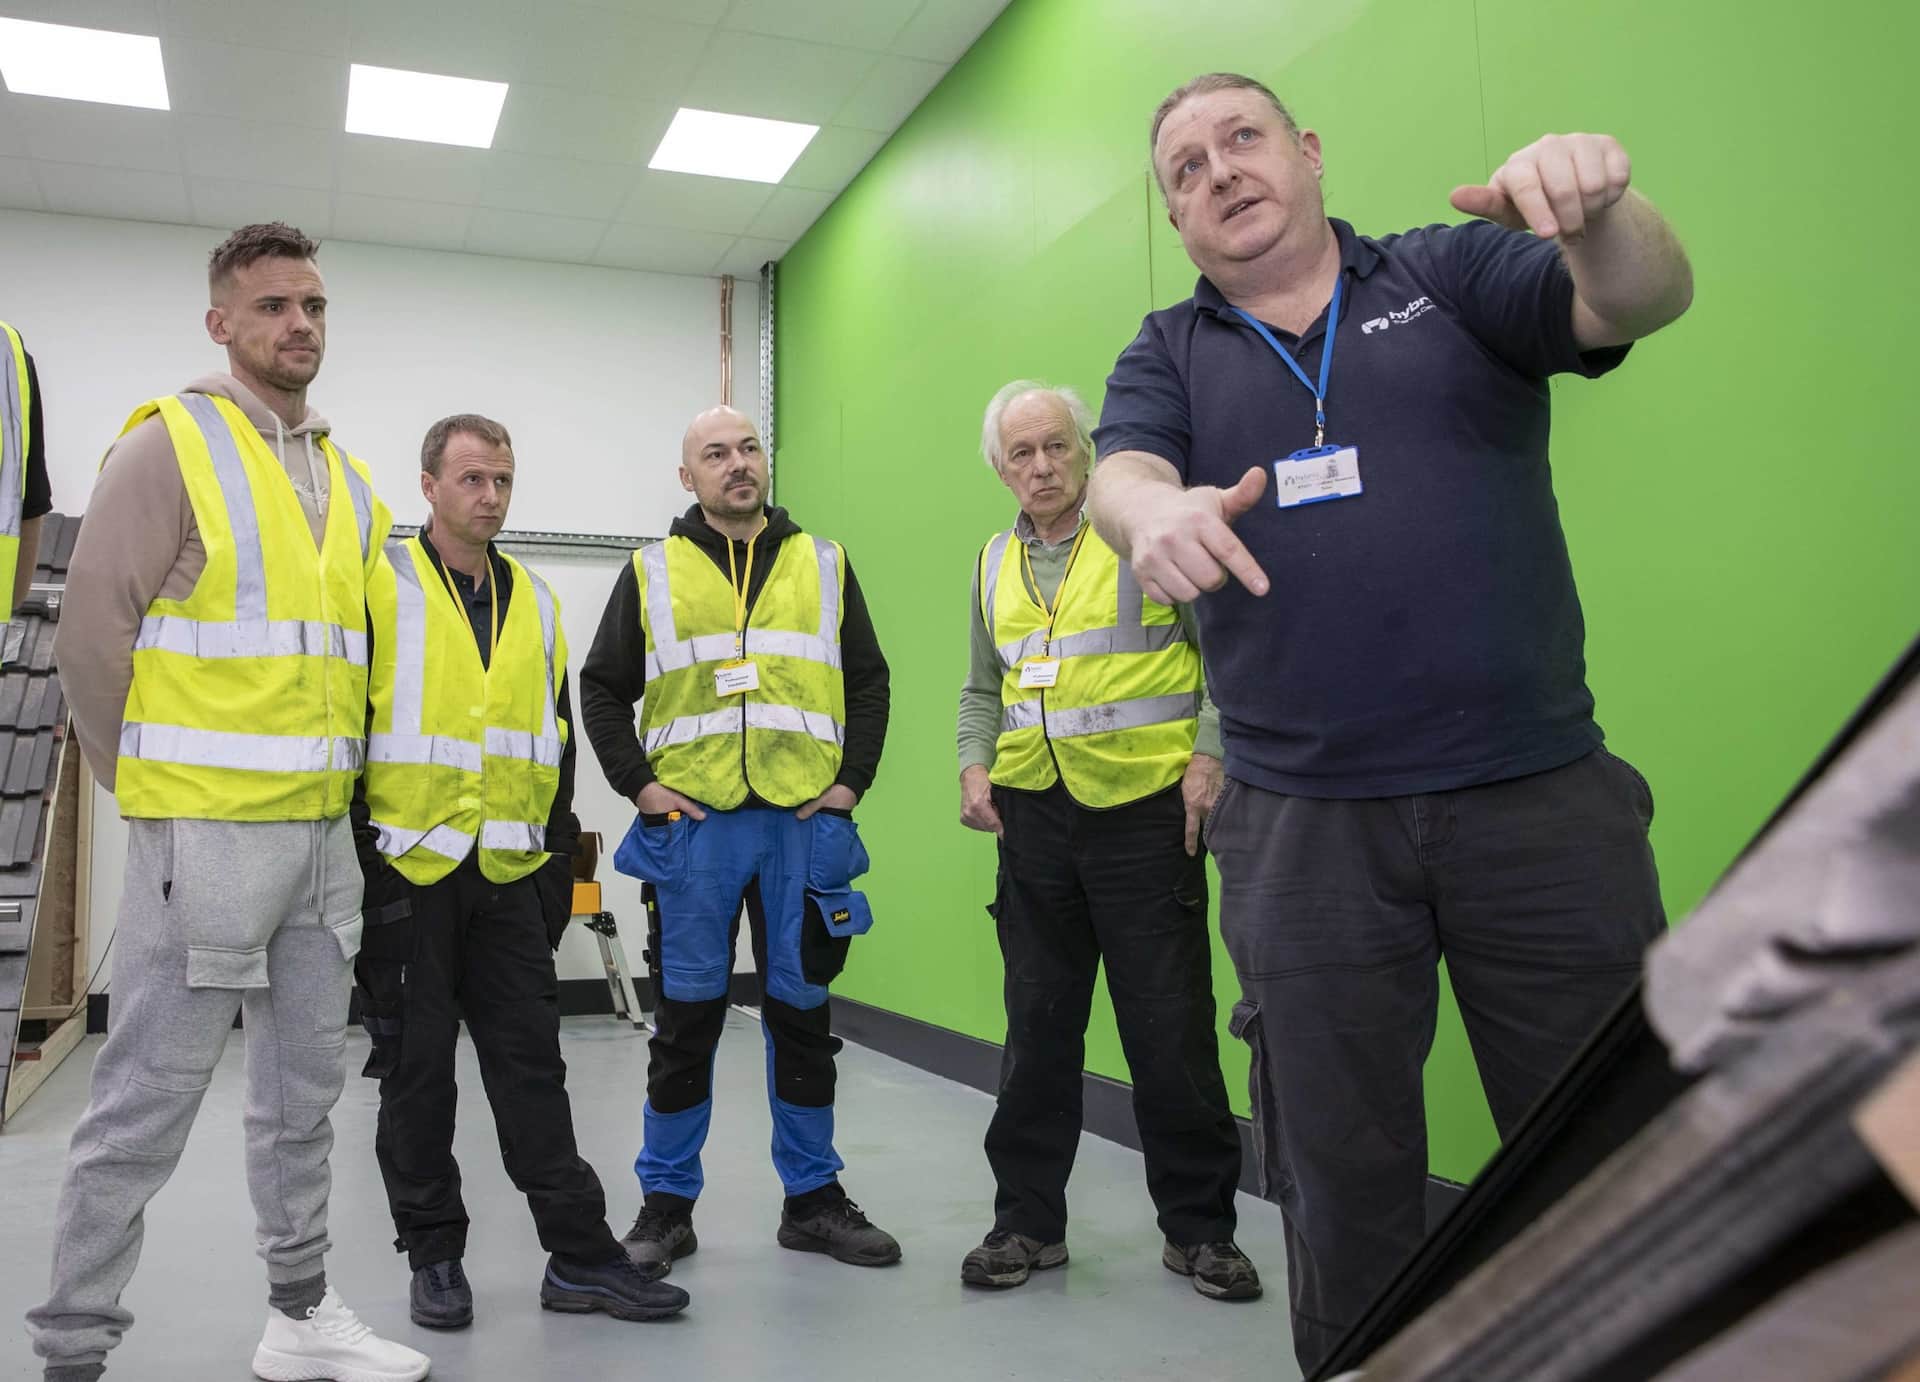 Hybrid Training Centre Liverpool - Gas, Plumbing, Electrical & Renewables